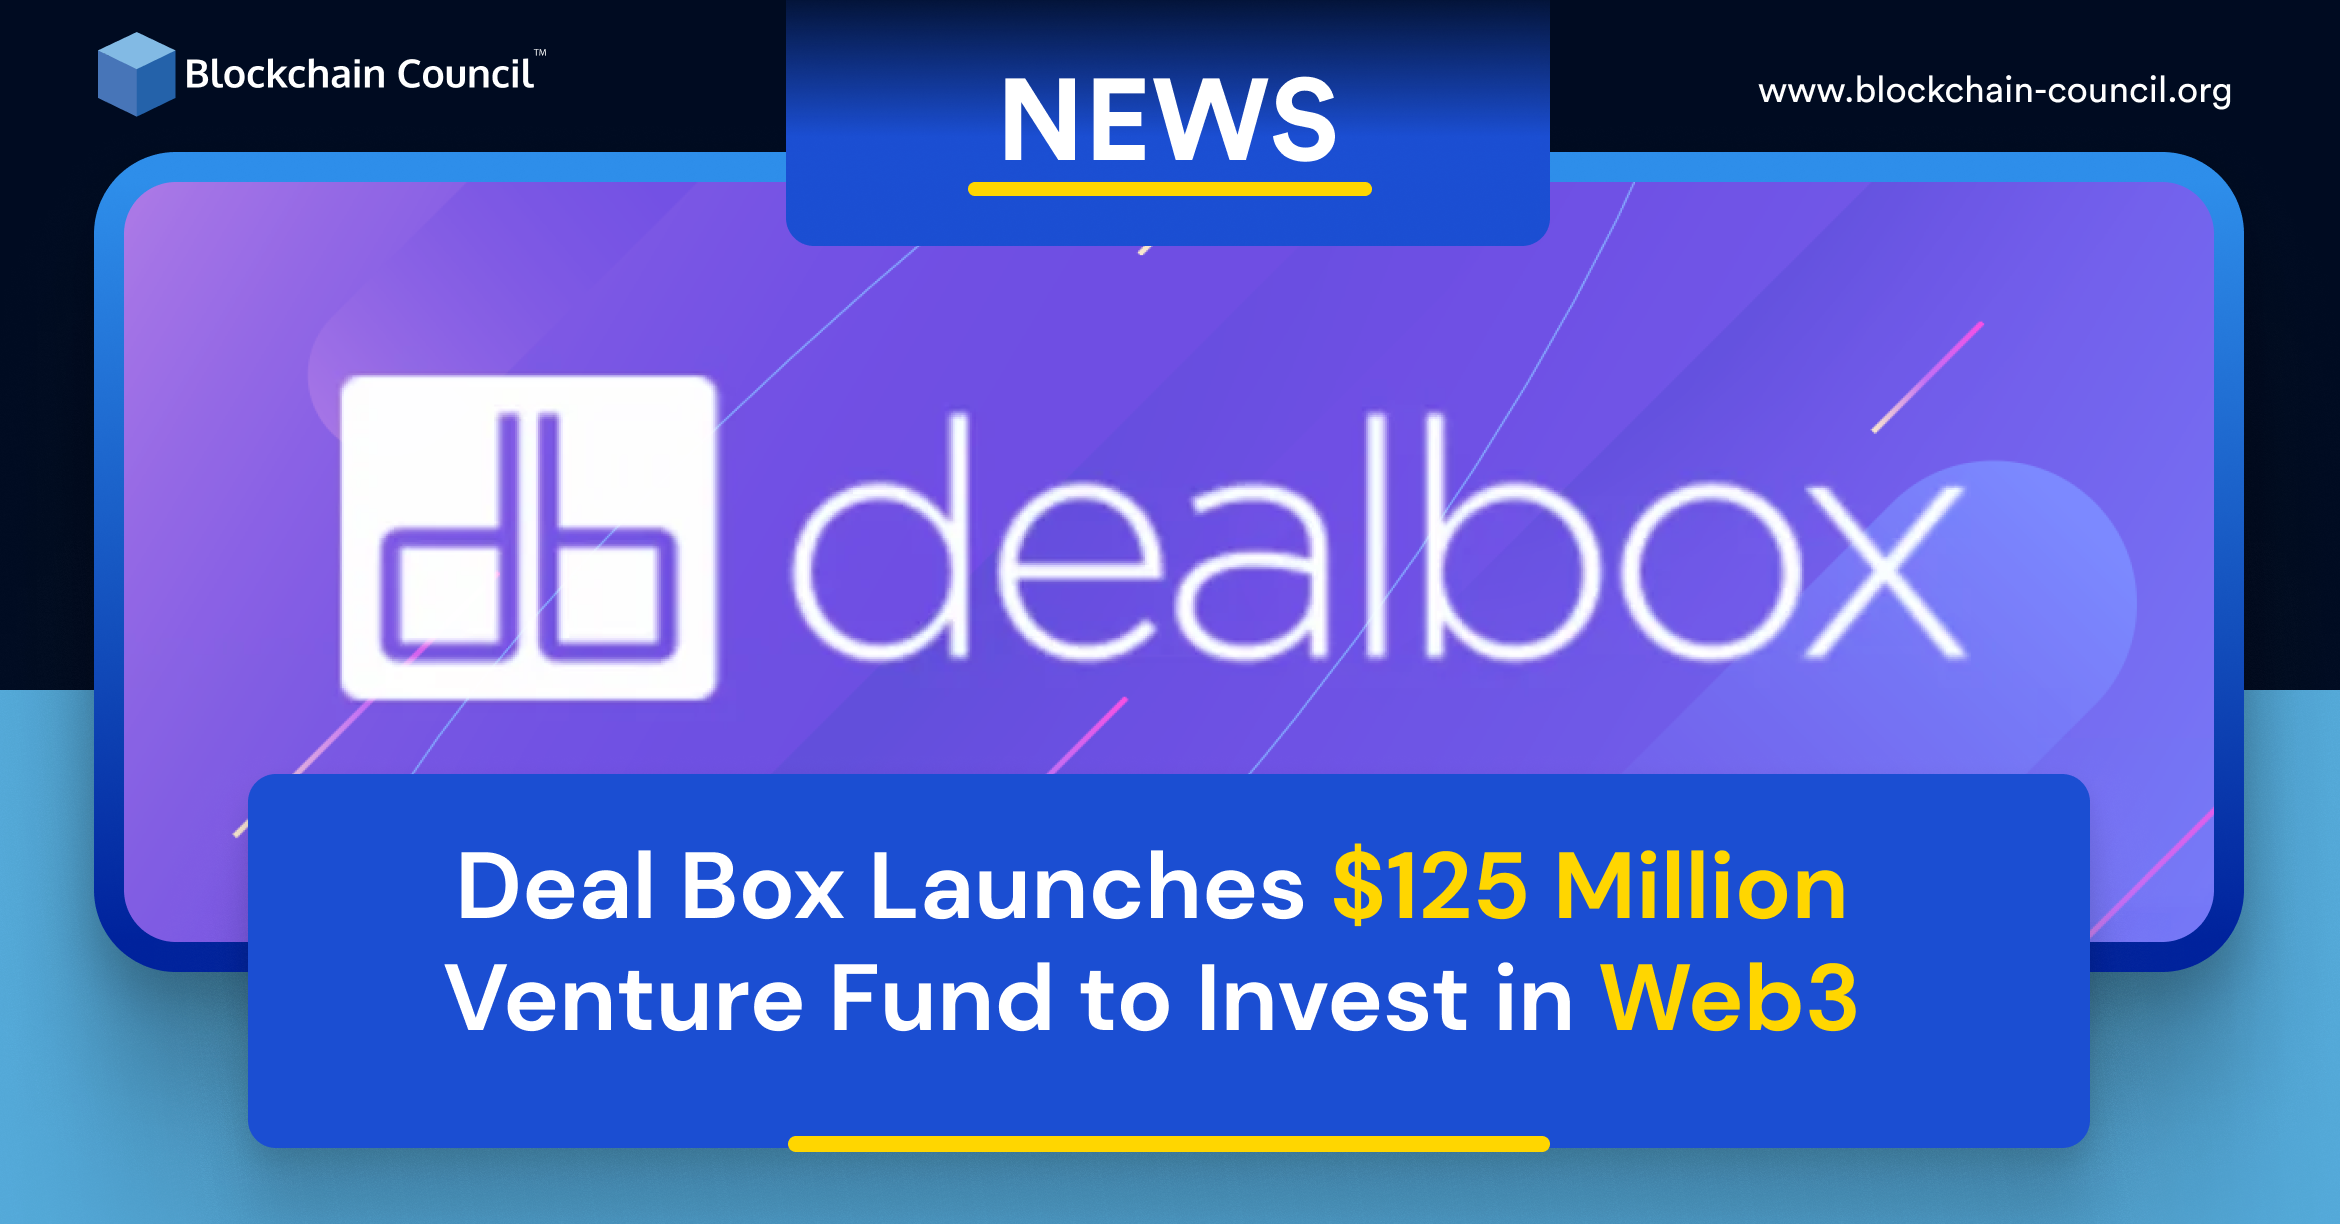 Deal Box Launches $125 Million Venture Fund to Invest in Web3